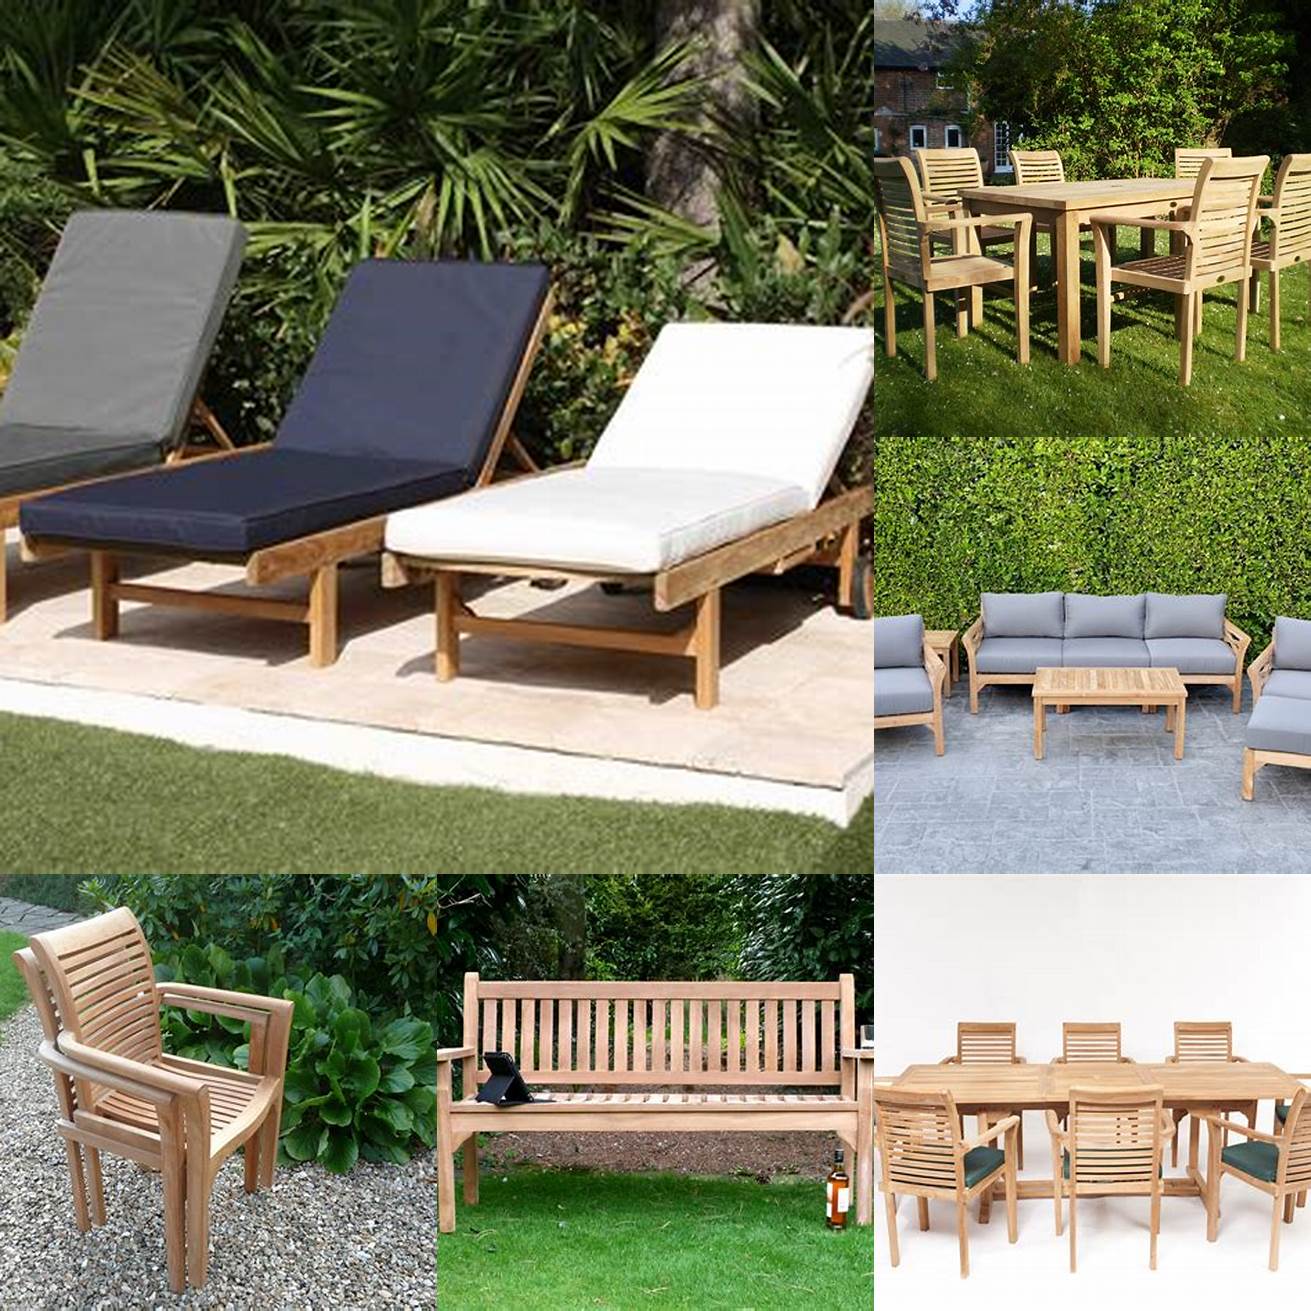 Outdoor Teak Furniture Covered with a Fitted Cover